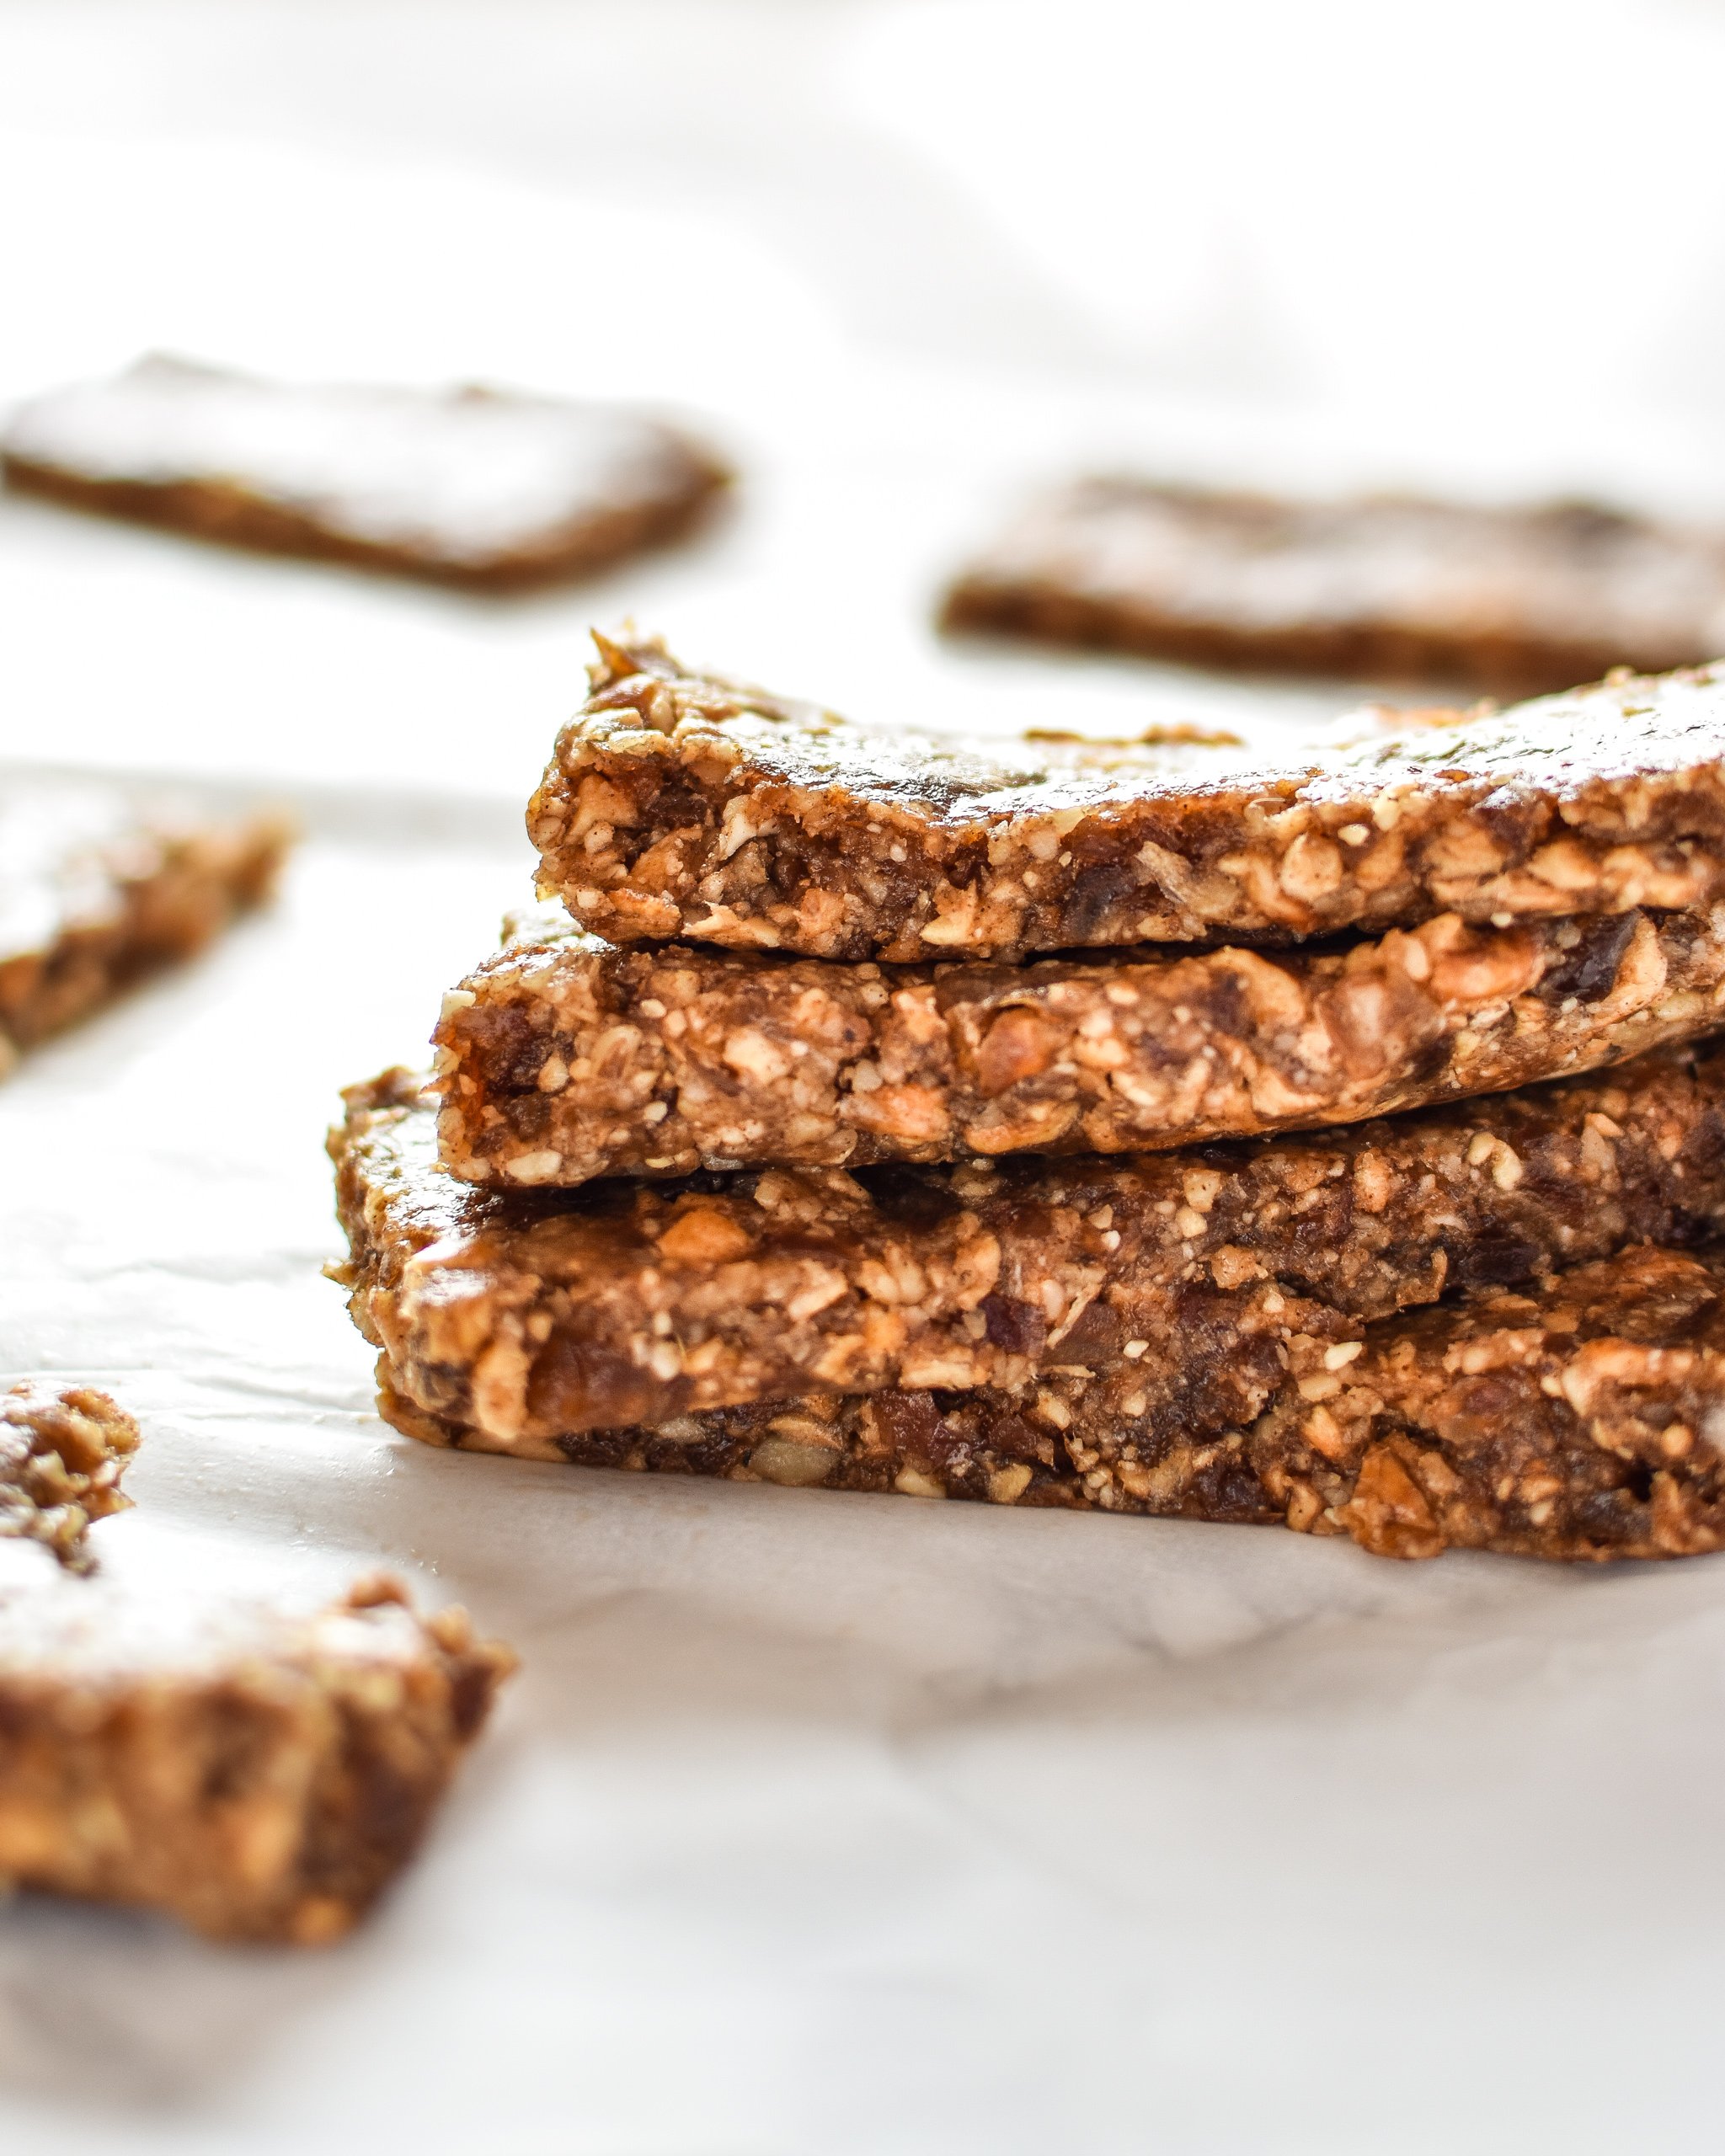 No-Bake Cinnamon Apple Date Bars stacked on one another, made with dates and dried apples